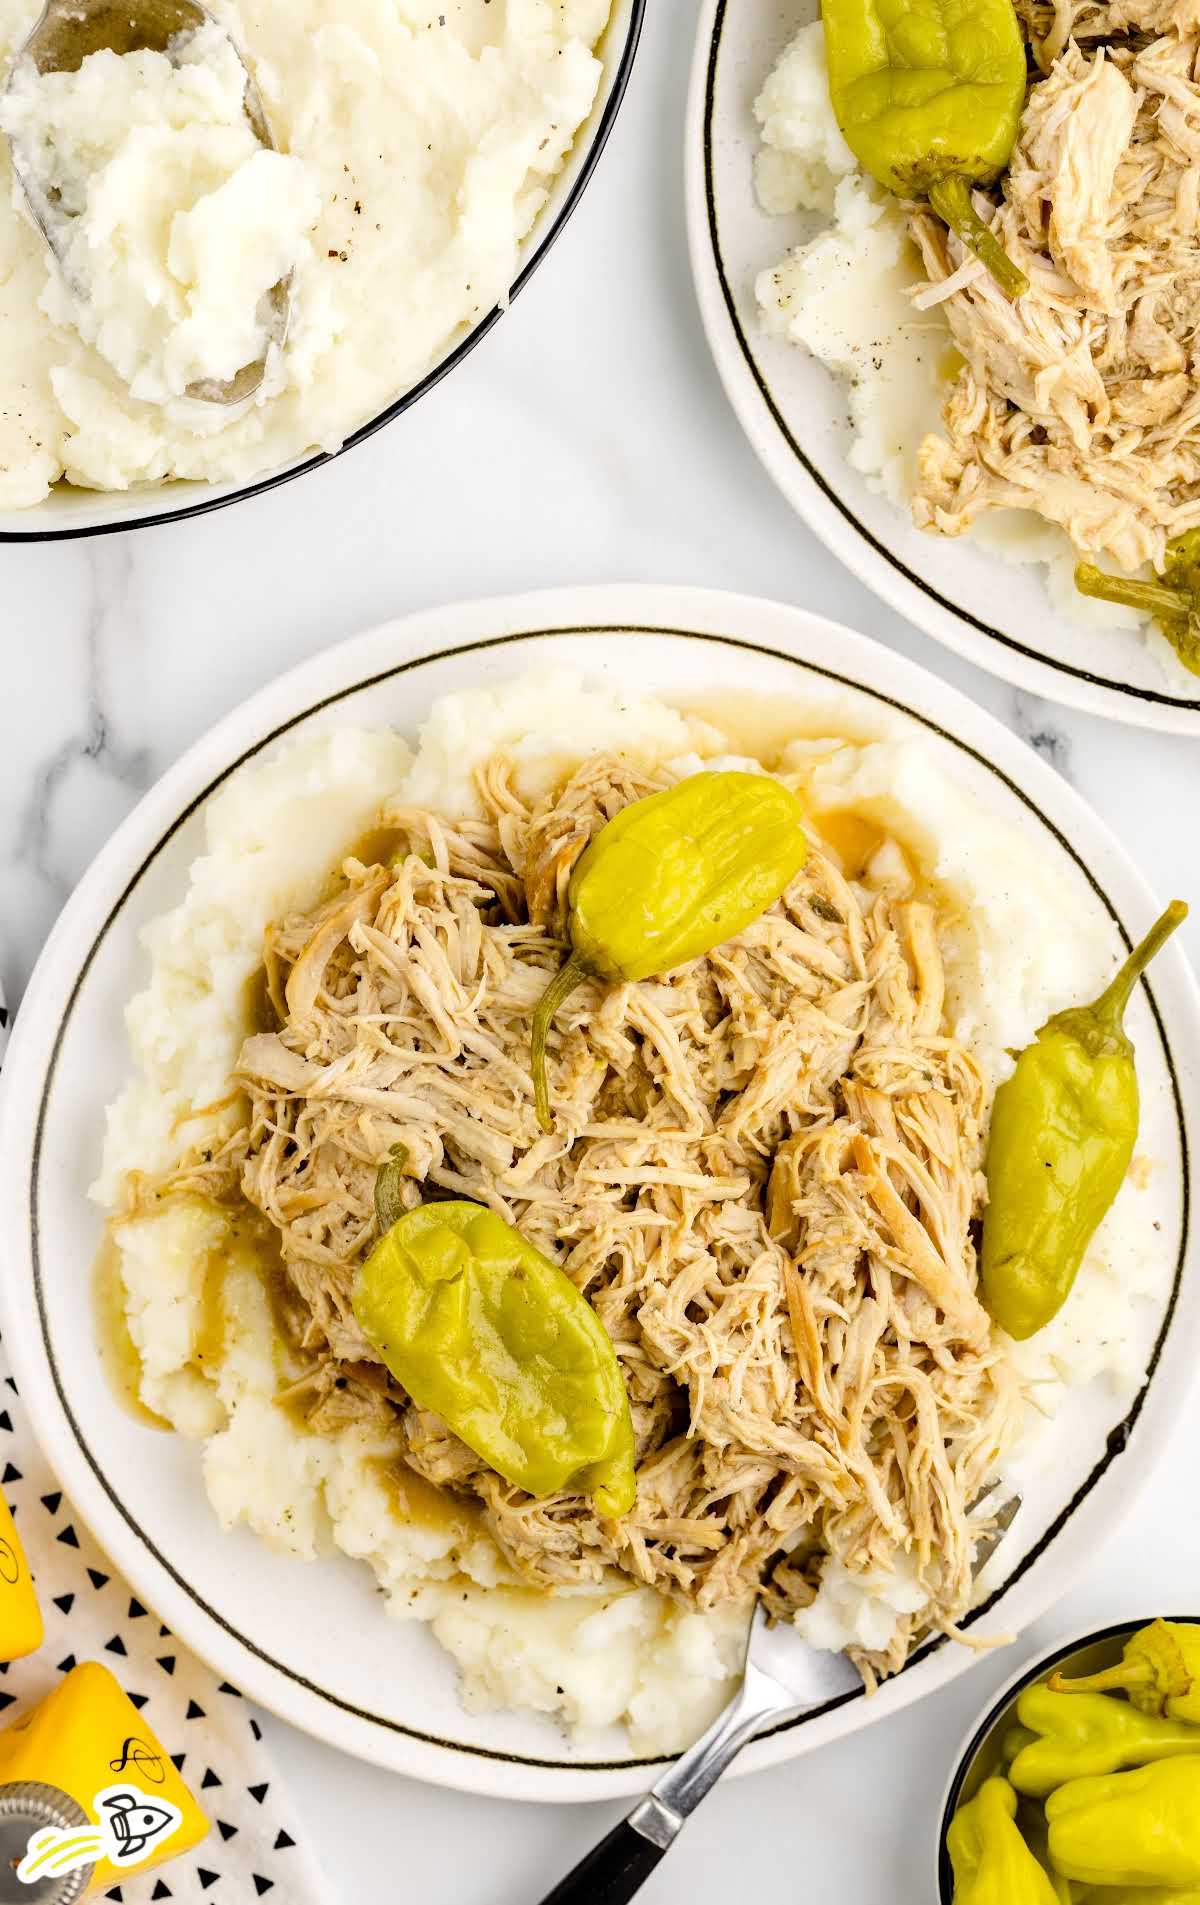 a plate of shredded chicken with pepperoncini served over a plate of mashed potatoes